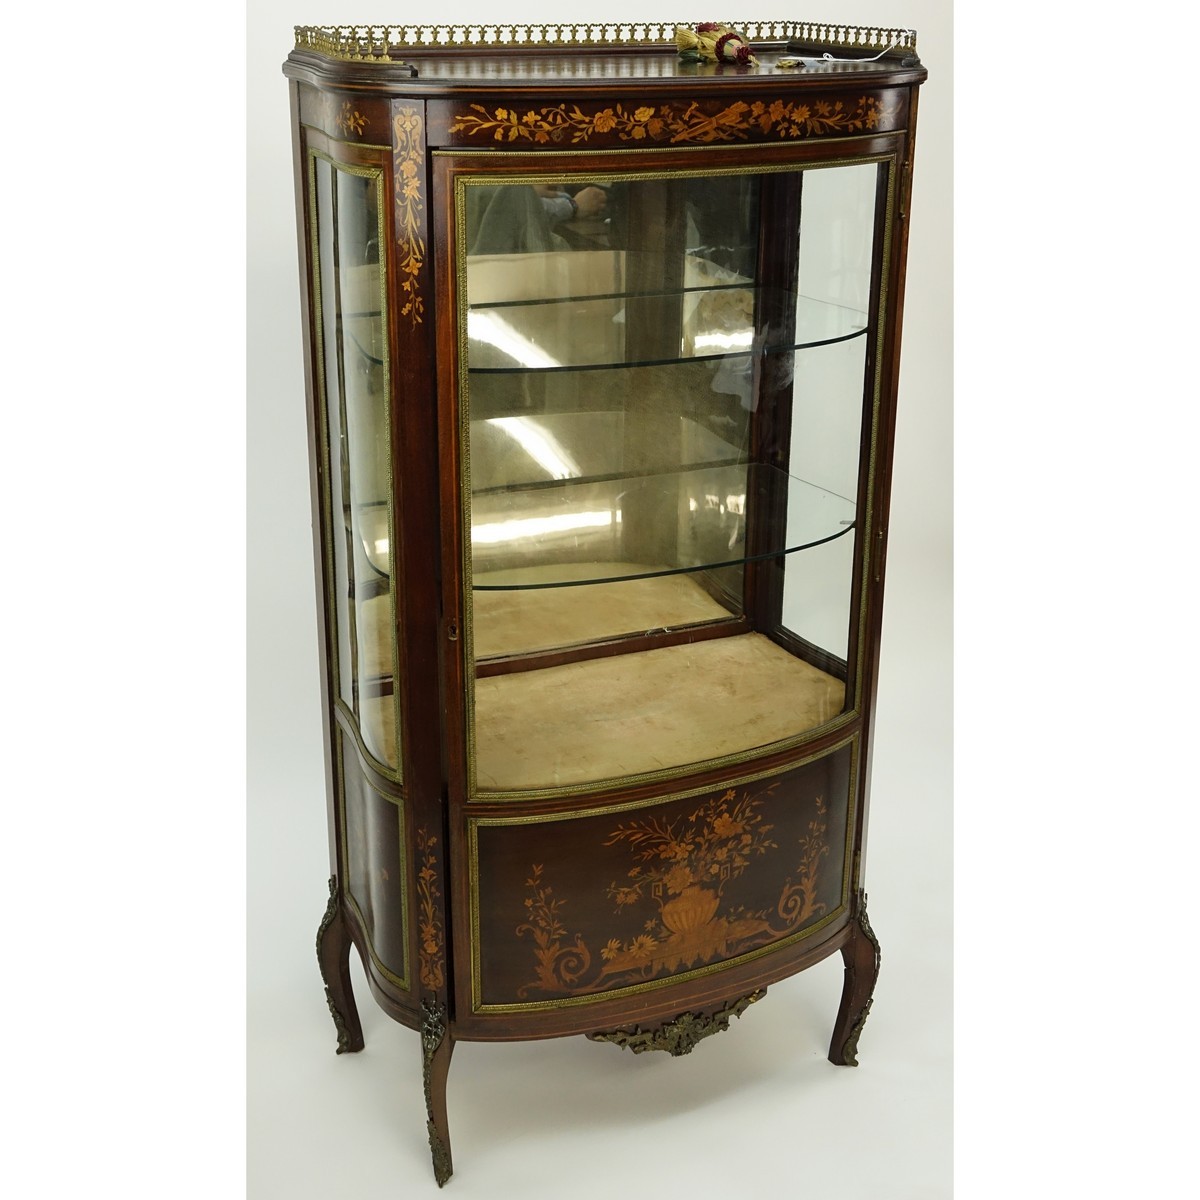 Tall Mid Century French Louis XVI Style Inlaid, Gilt Brass Mounted Vitrine. Floral inlay throughput the panel and top apron, gallery, stands on curved tapering legs, key included.